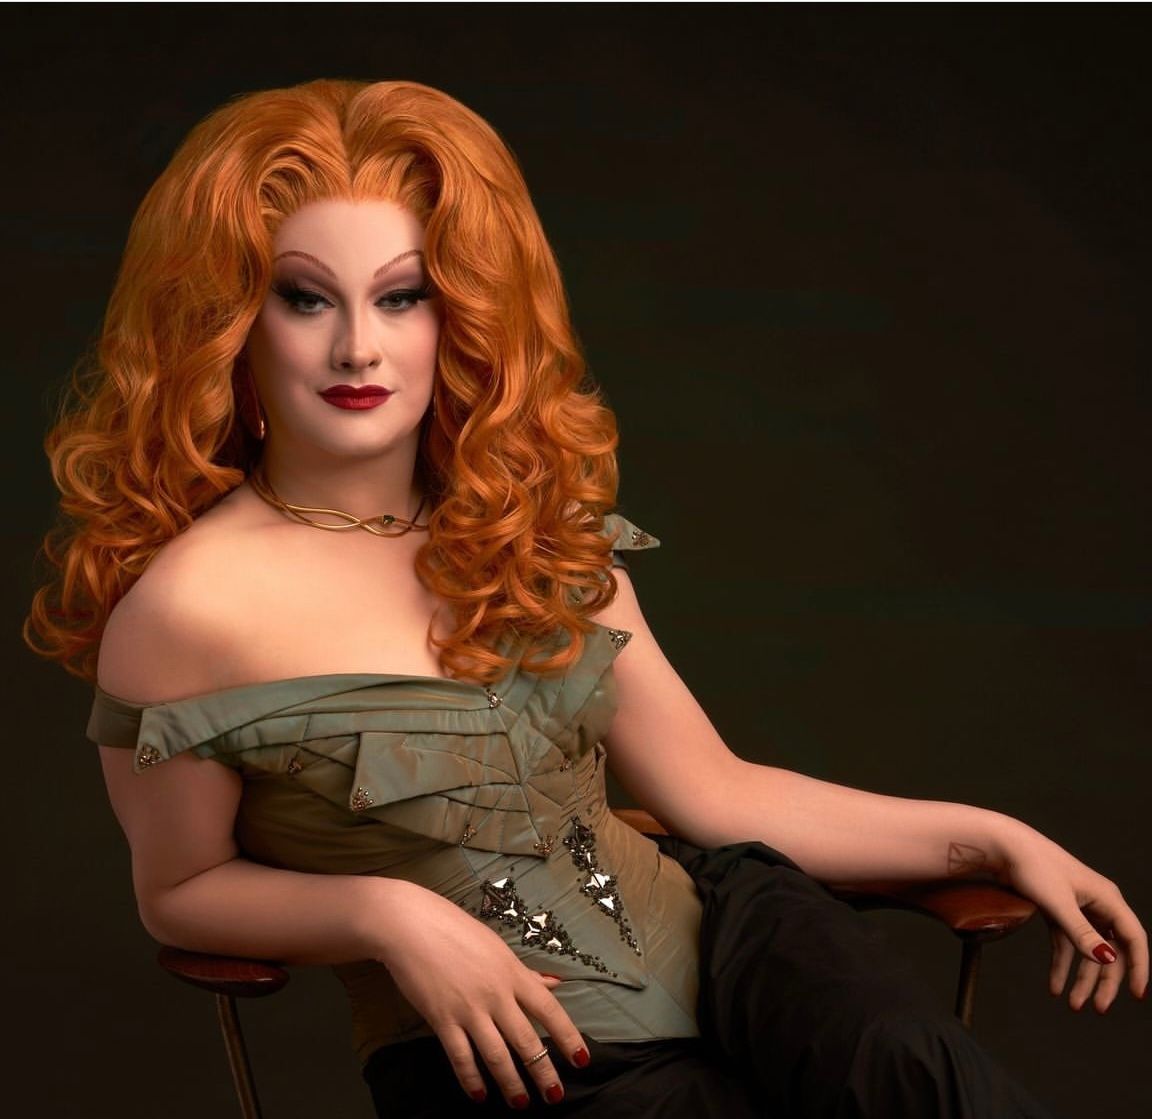 JINKX MONSOON Returns to Provincetown Town Hall on Sunday, July 14th @ 9PM\u2014ONE SHOW ONLY!